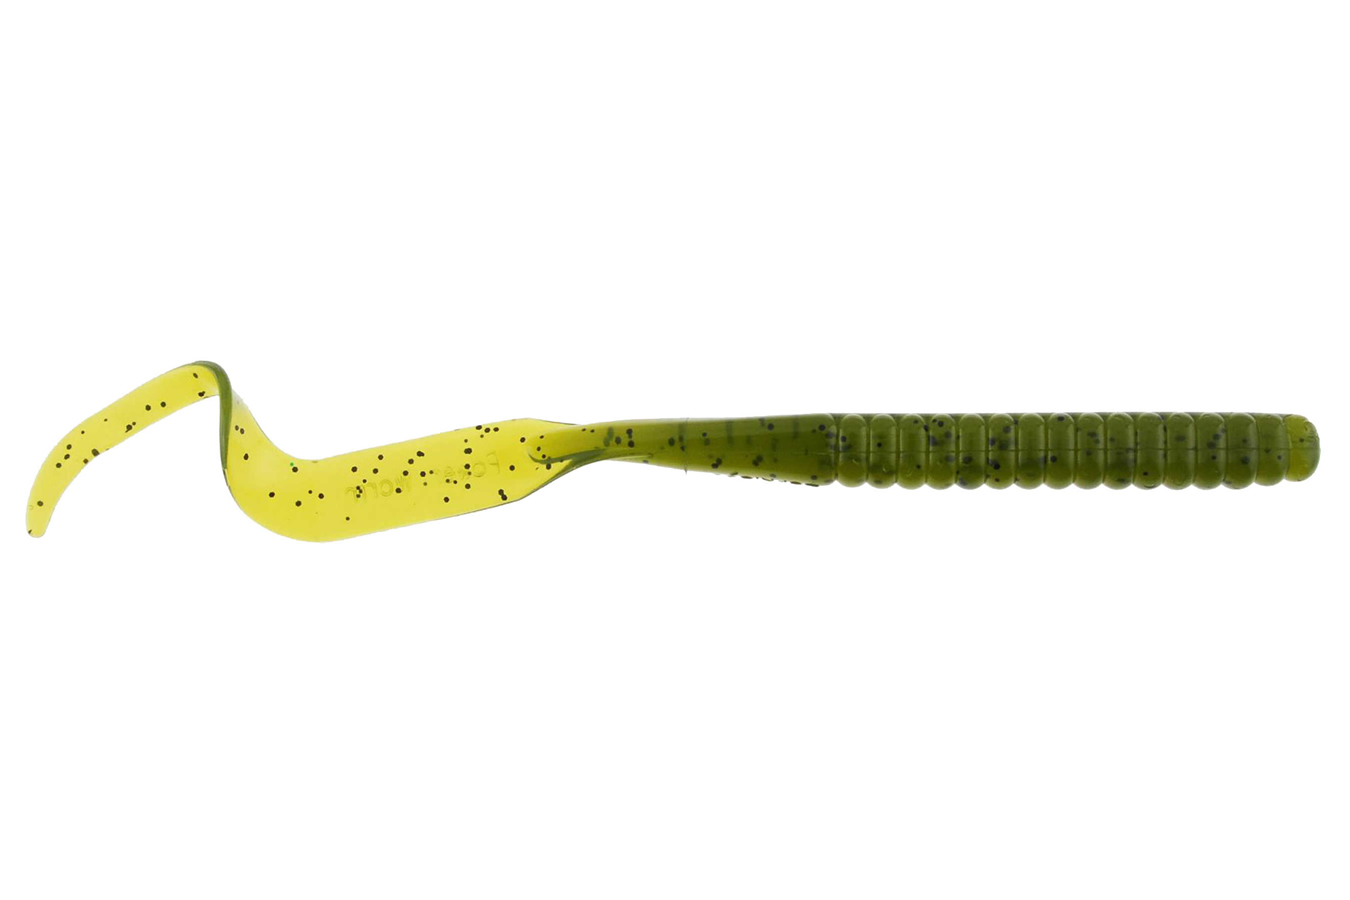 Buy Bait For Fishing Worm online